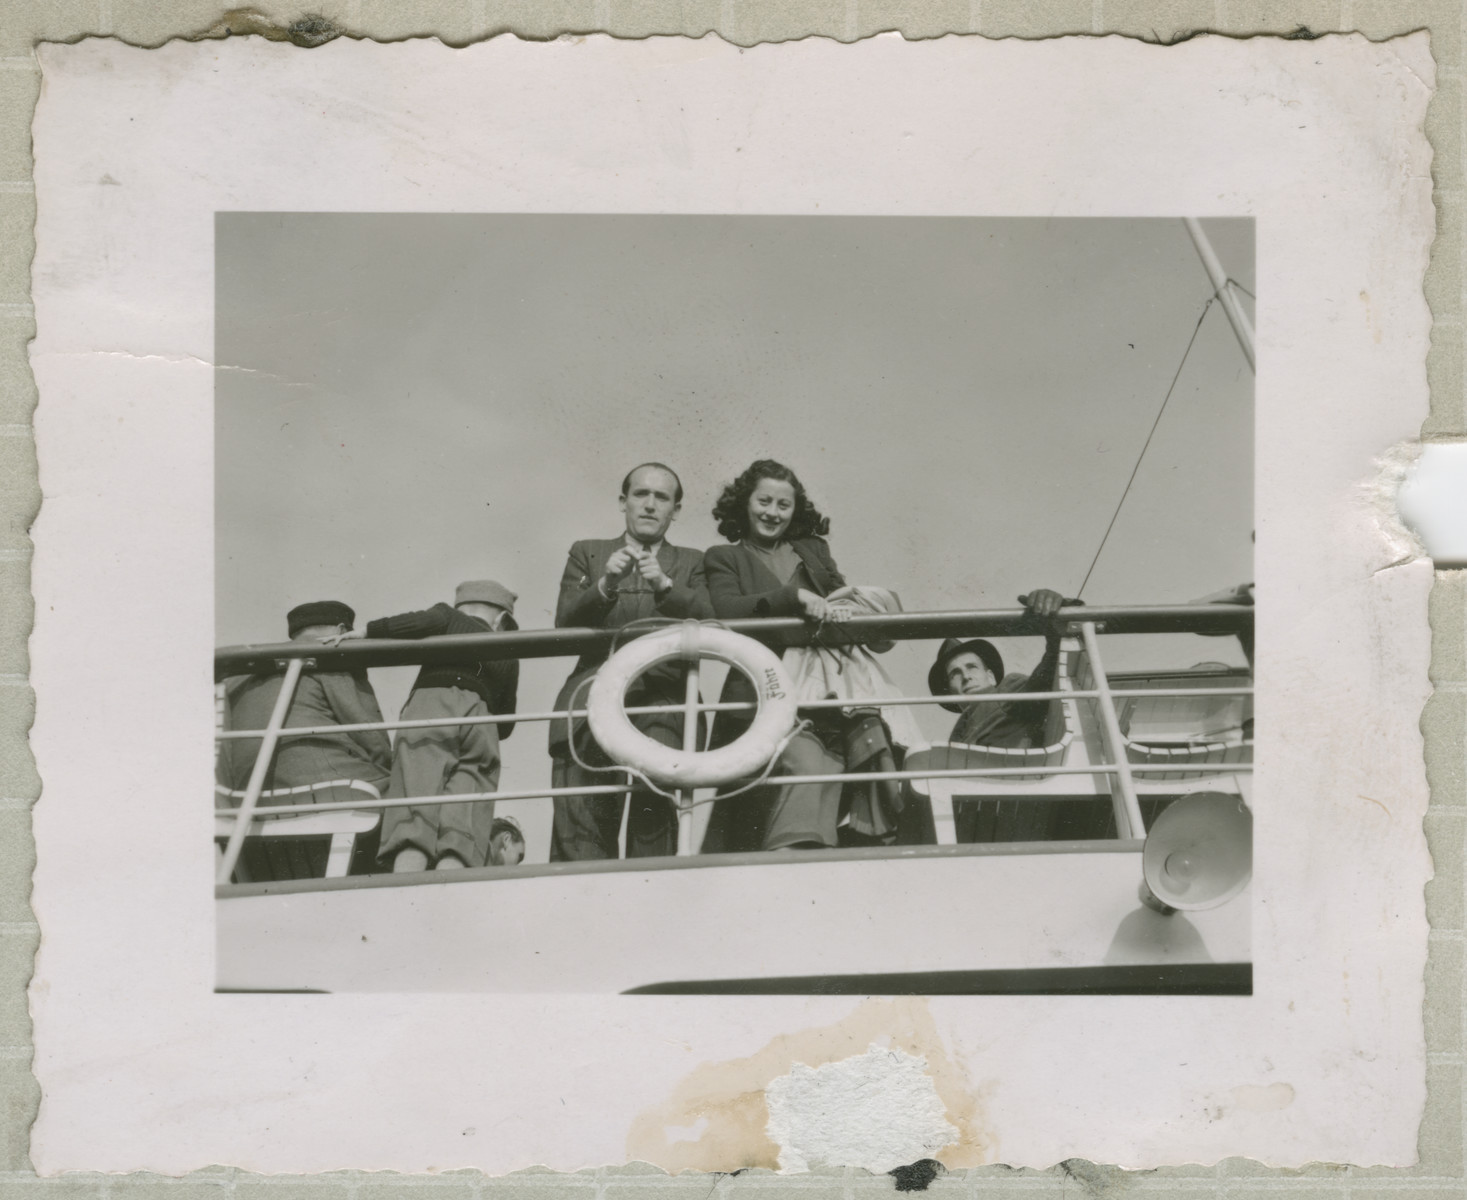 Immigrants to the United States stand on the deck of the Marine Flasher. 

In the center are Bronka Gutfreund and Mietek Amsterdam (later Max Fisch).